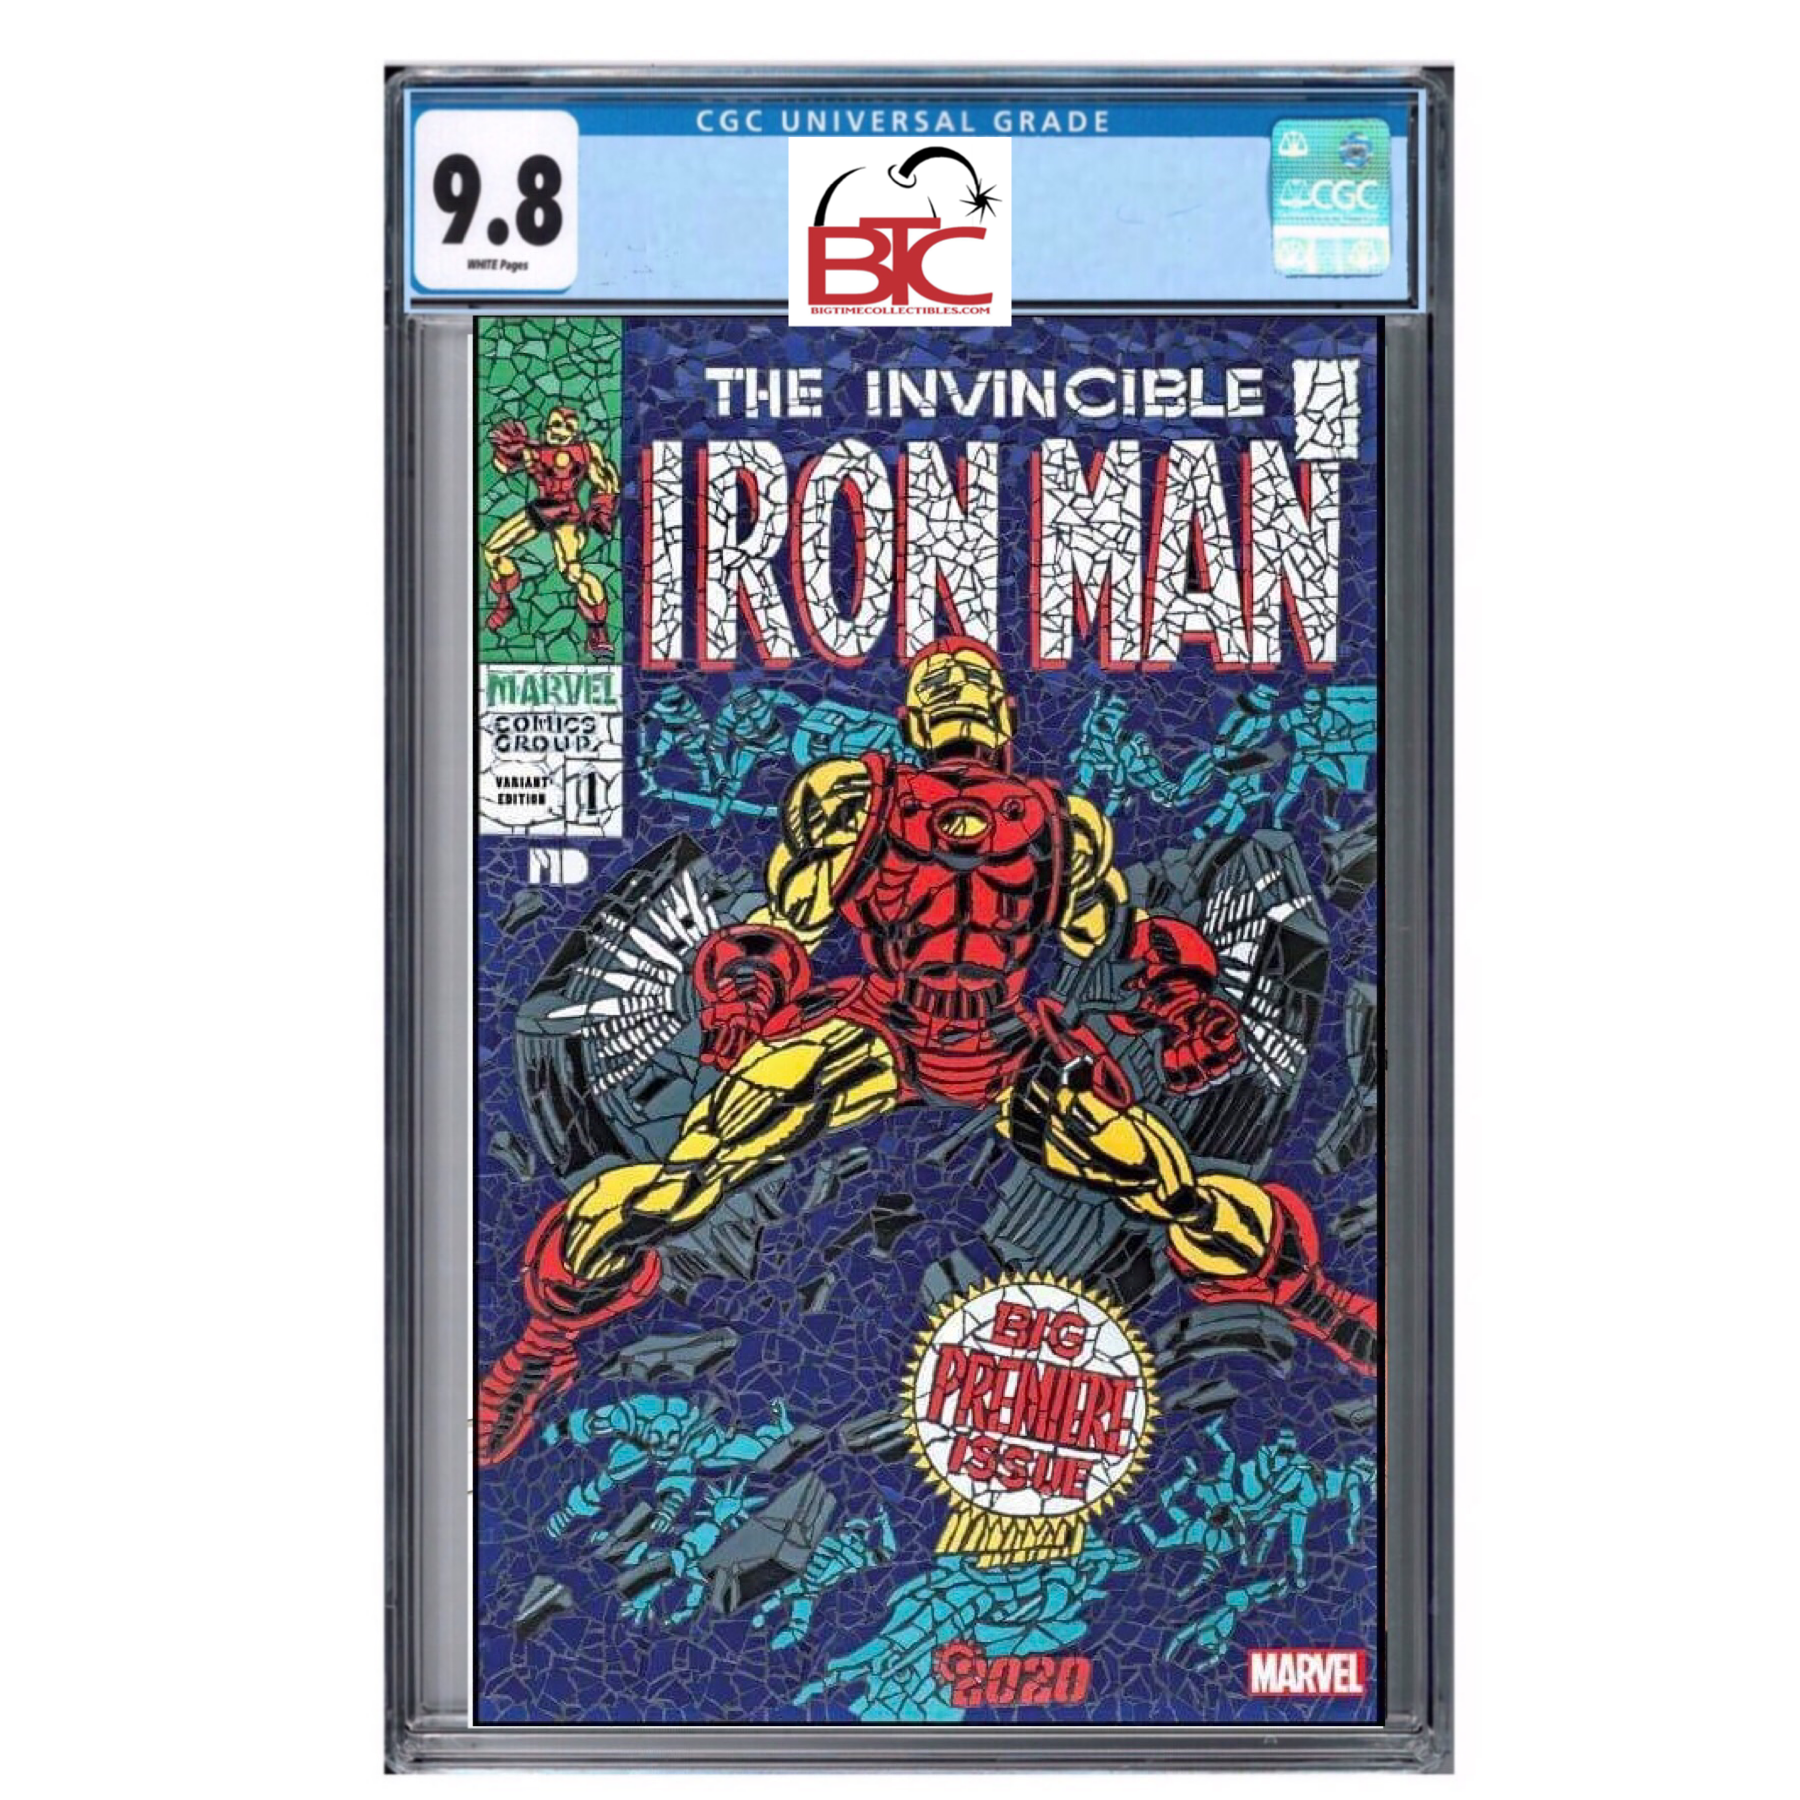 IRON MAN 2020 #1 SHATTERED COMICS EXCLUSIVE RAW & CGC 9.8 GRADED OPTIONS